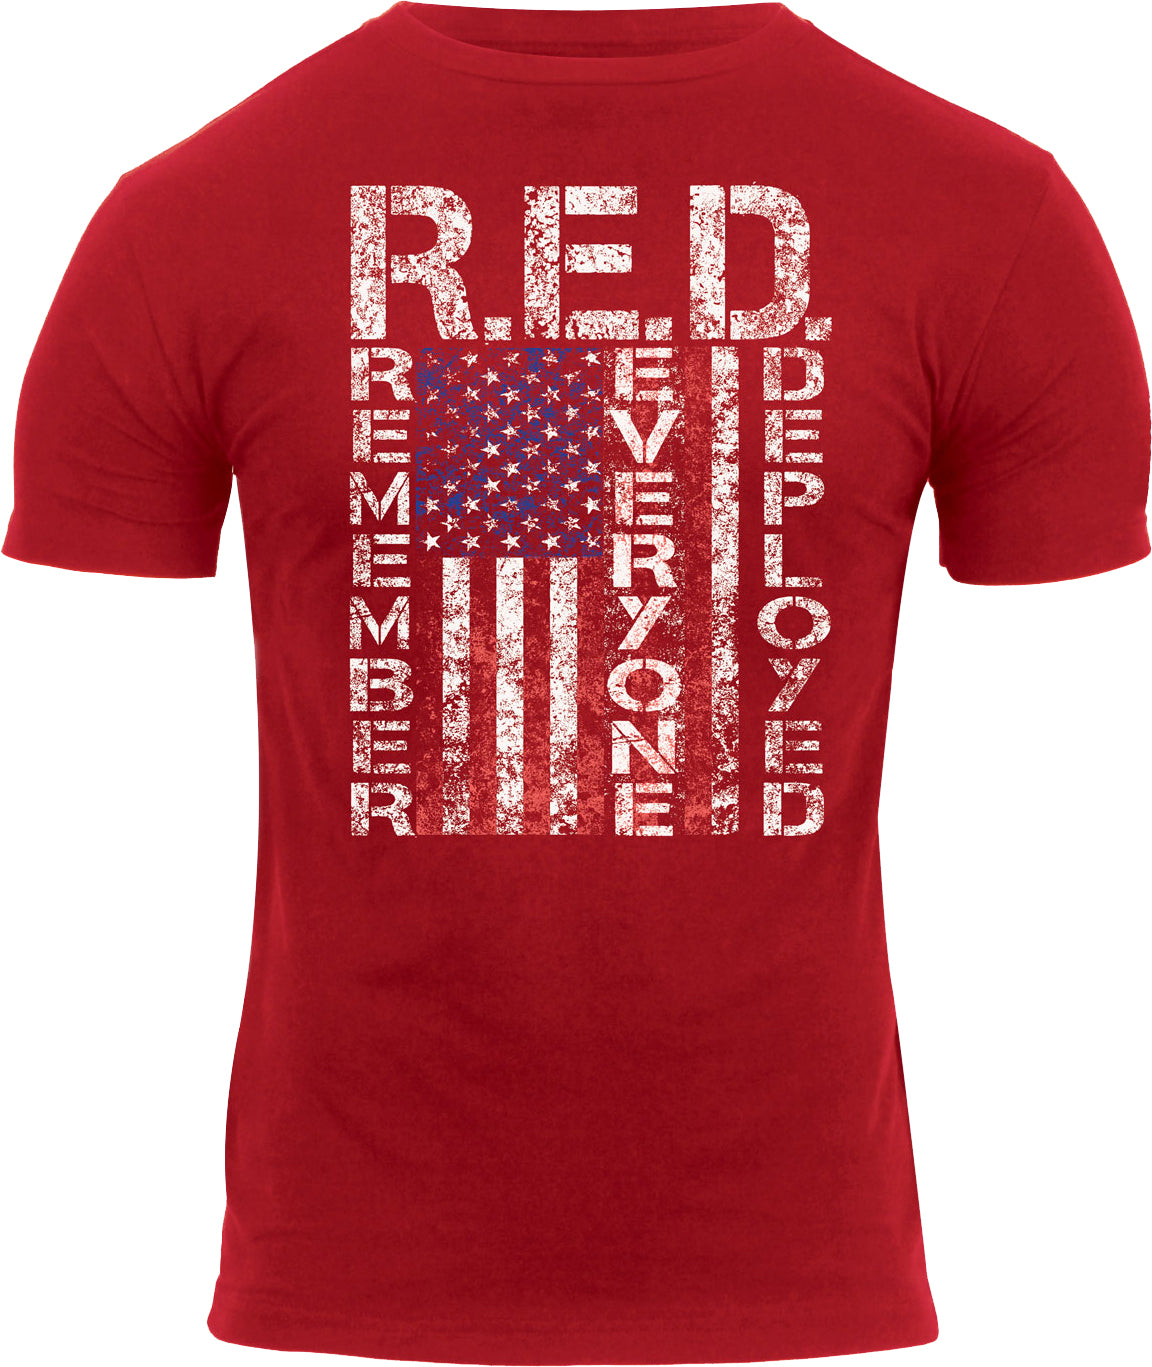 Red - Athletic Fit R.E.D. (Remember Everyone Deployed) T-Shirt